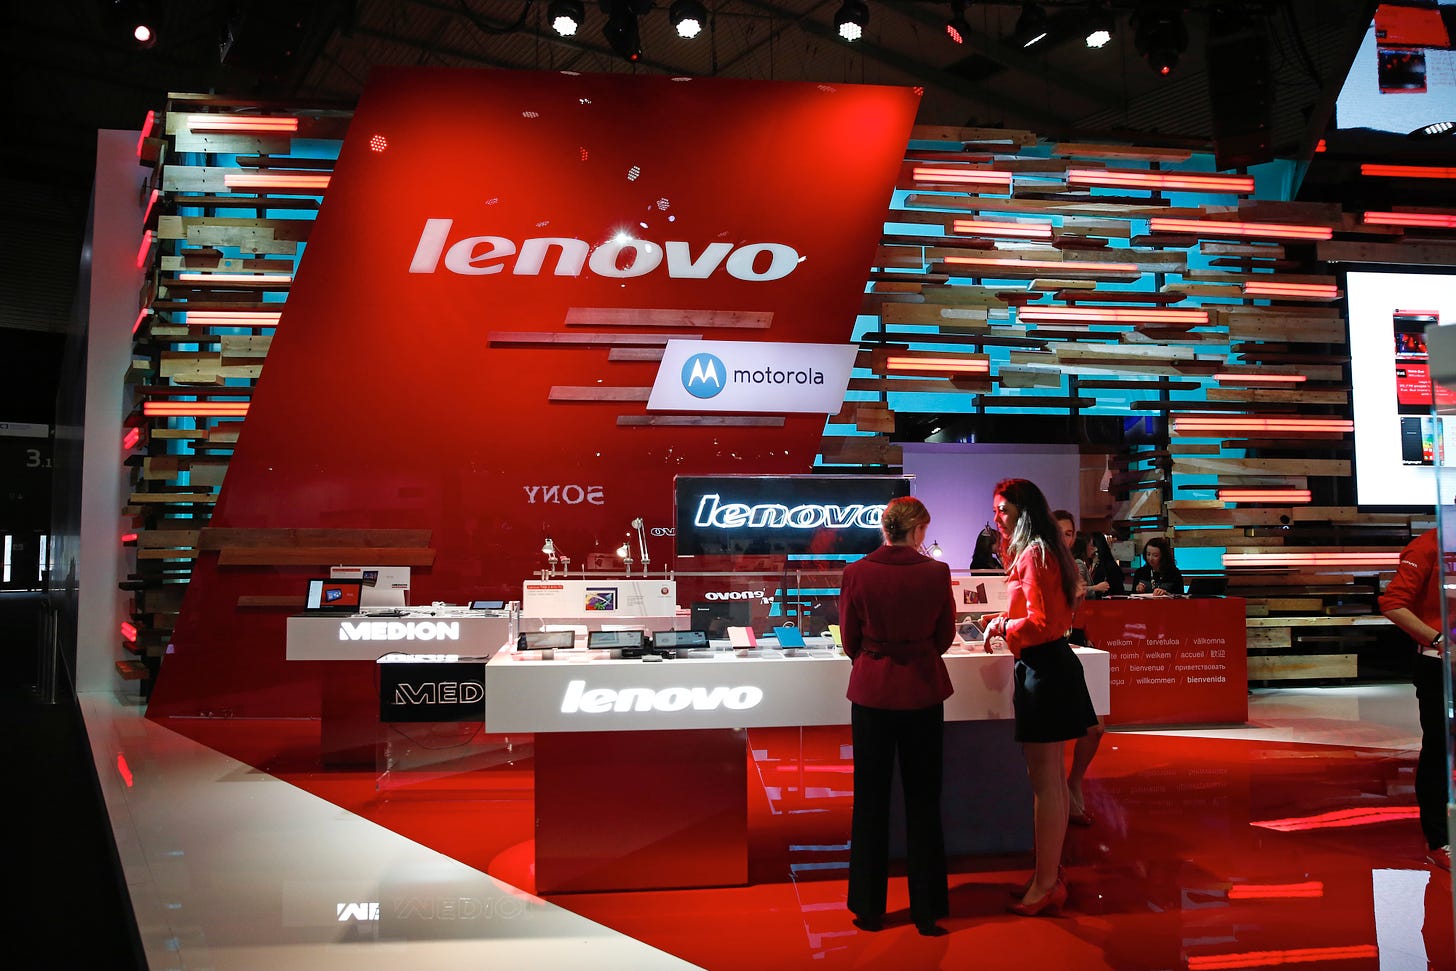 How Lenovo became a global PC powerhouse | Fortune